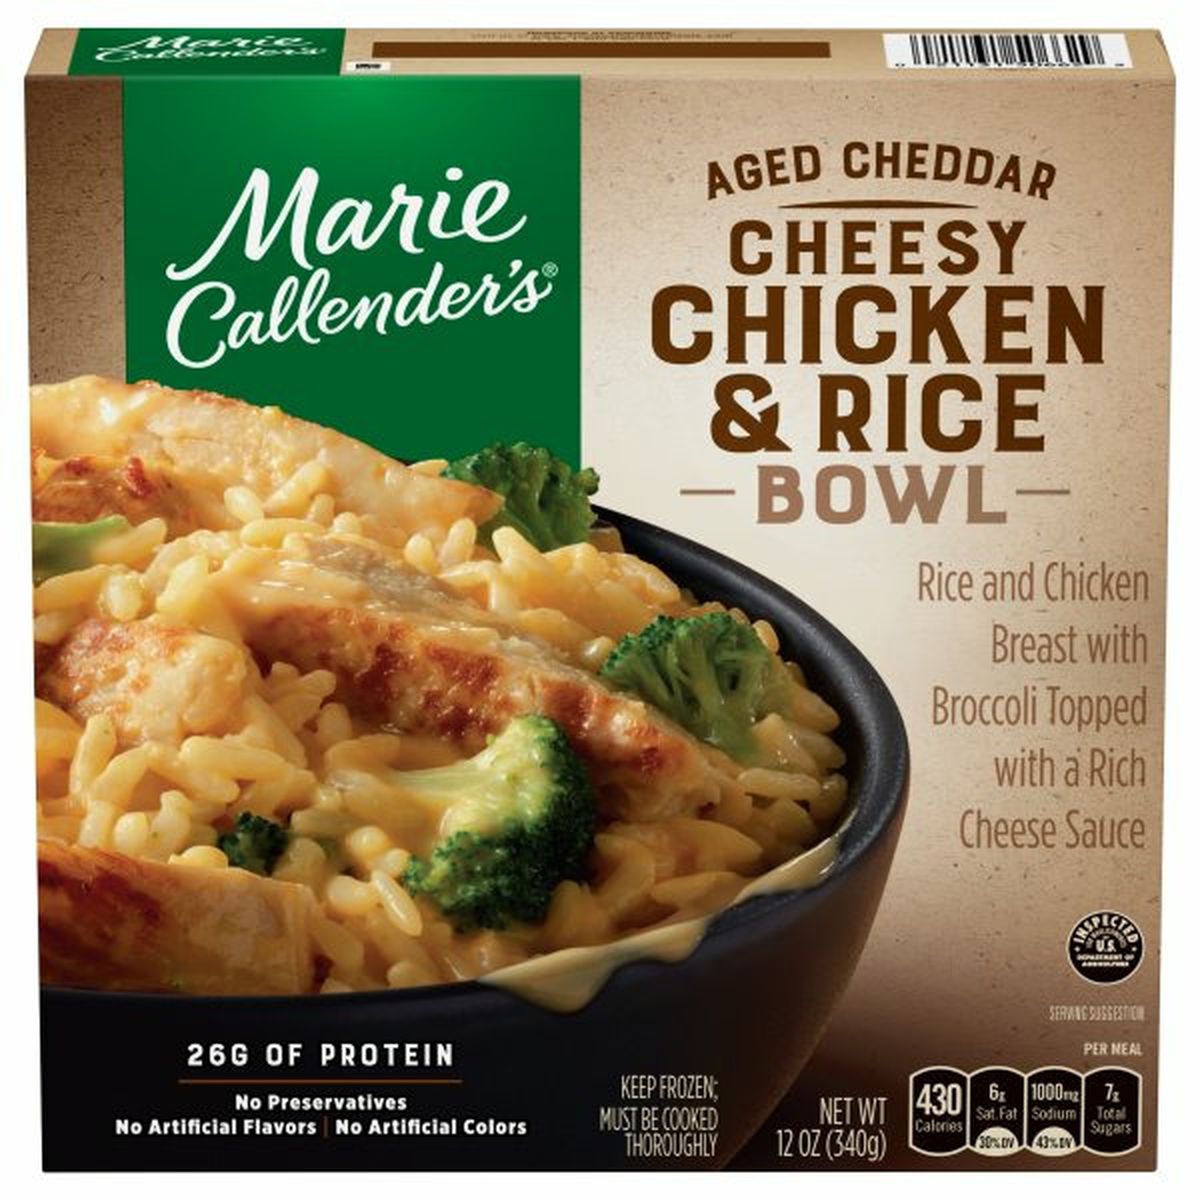 Calories in Marie Callender's Cheesy Chicken & Rice Bowl, Aged Cheddar